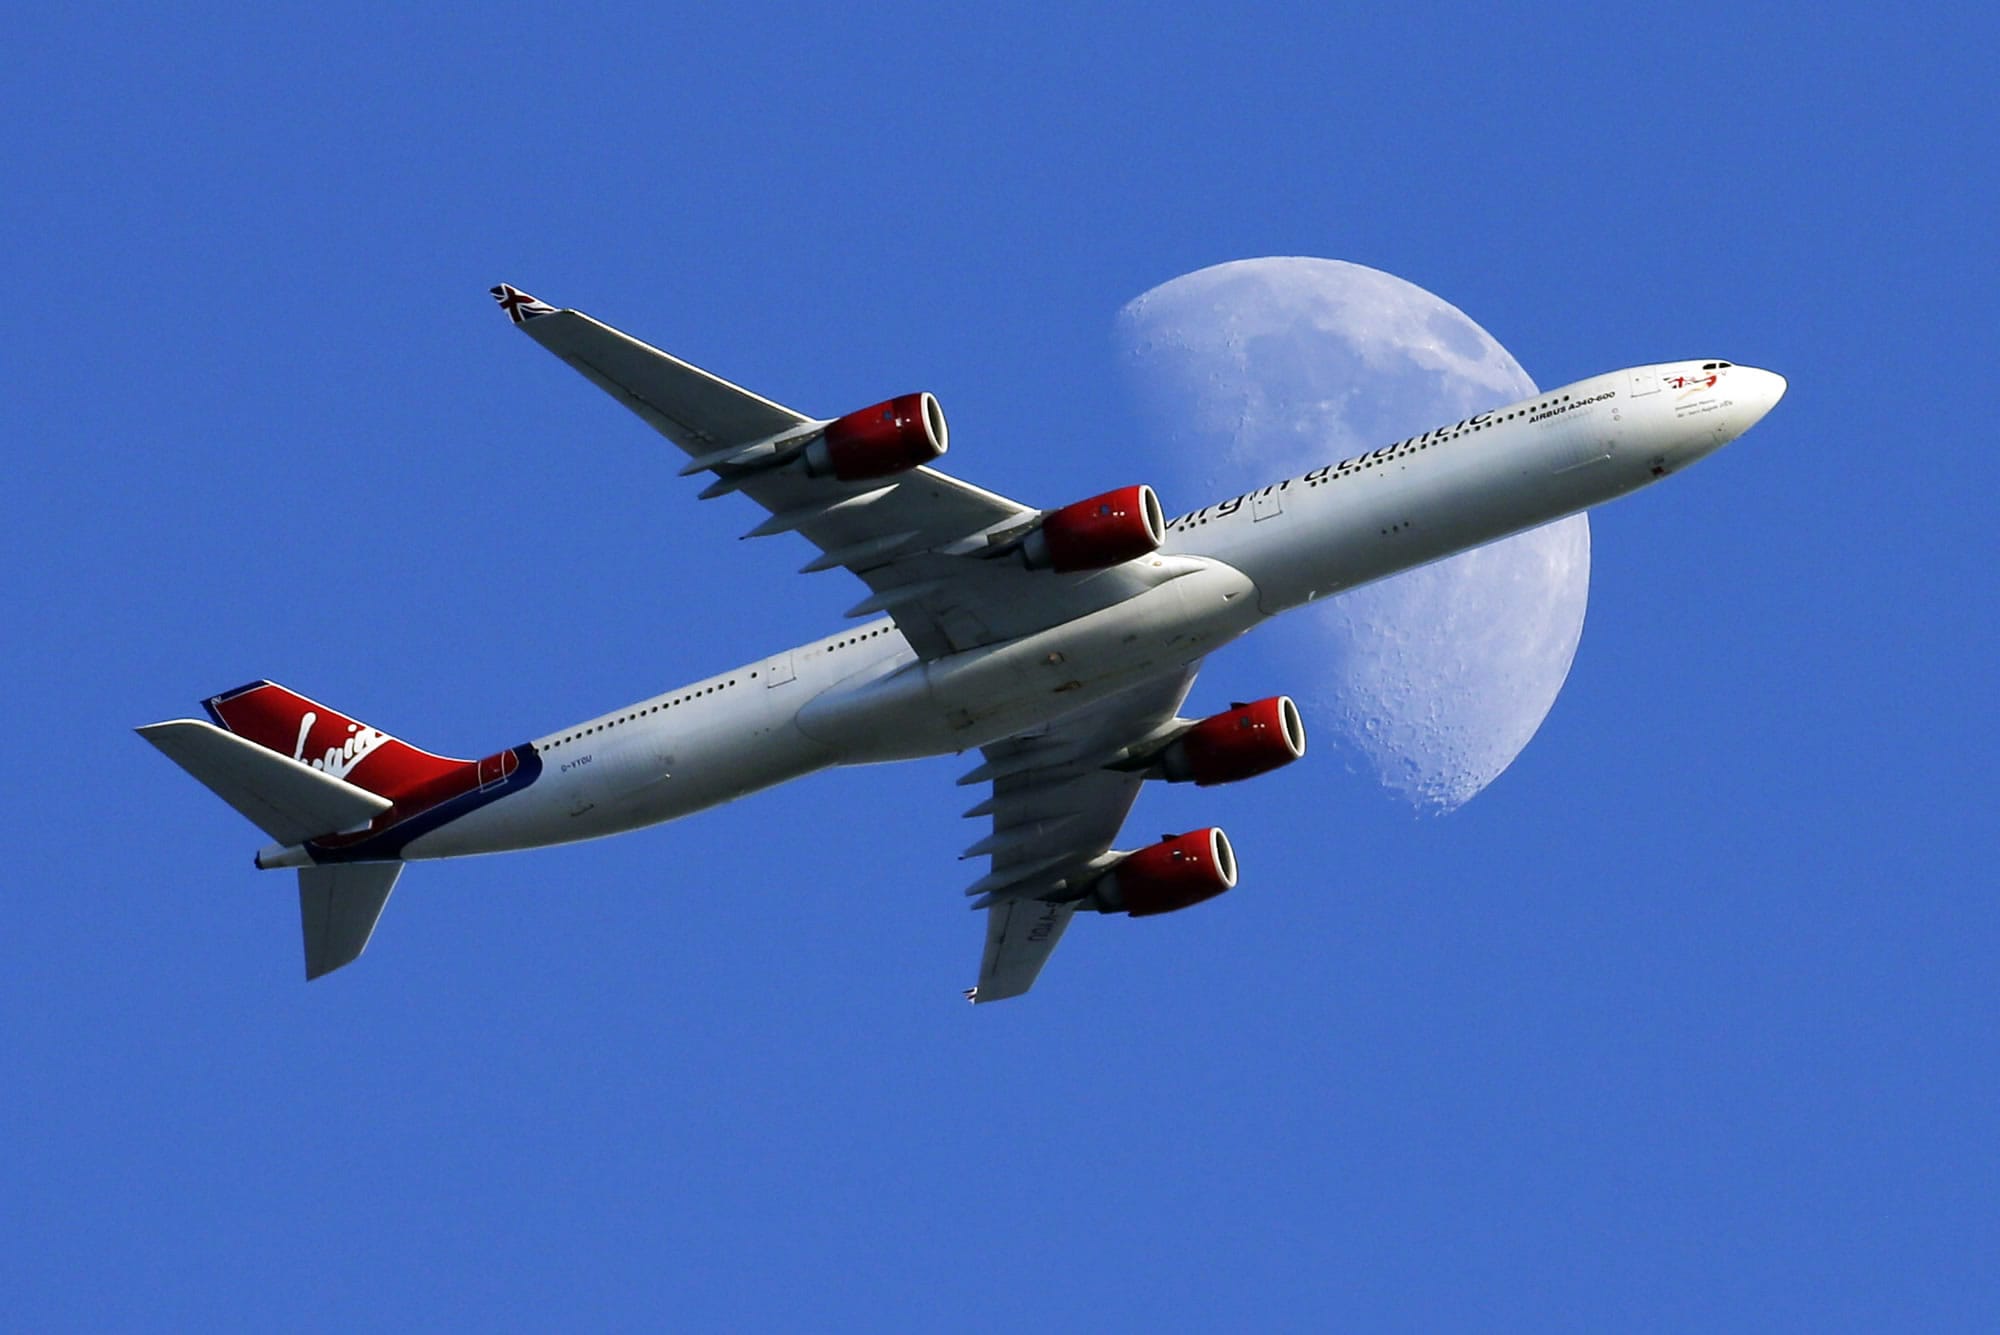 FILE - In this Sunday, Aug. 23, 2015, file photo, a Virgin Atlantic passenger plane crosses a waxing gibbous moon on its way to the Los Angeles International Airport, in Whittier, Calif. Alaska said Wednesday, March 22, 2017, that it will retire the Virgin brand, probably in 2019. Alaska announced in 2016, that it was buying Virgin, but CEO Brad Tilden held out hope to Virgin fans that he might keep the Virgin America brand, and run it and Alaska as separate airlines under the same corporate umbrella.